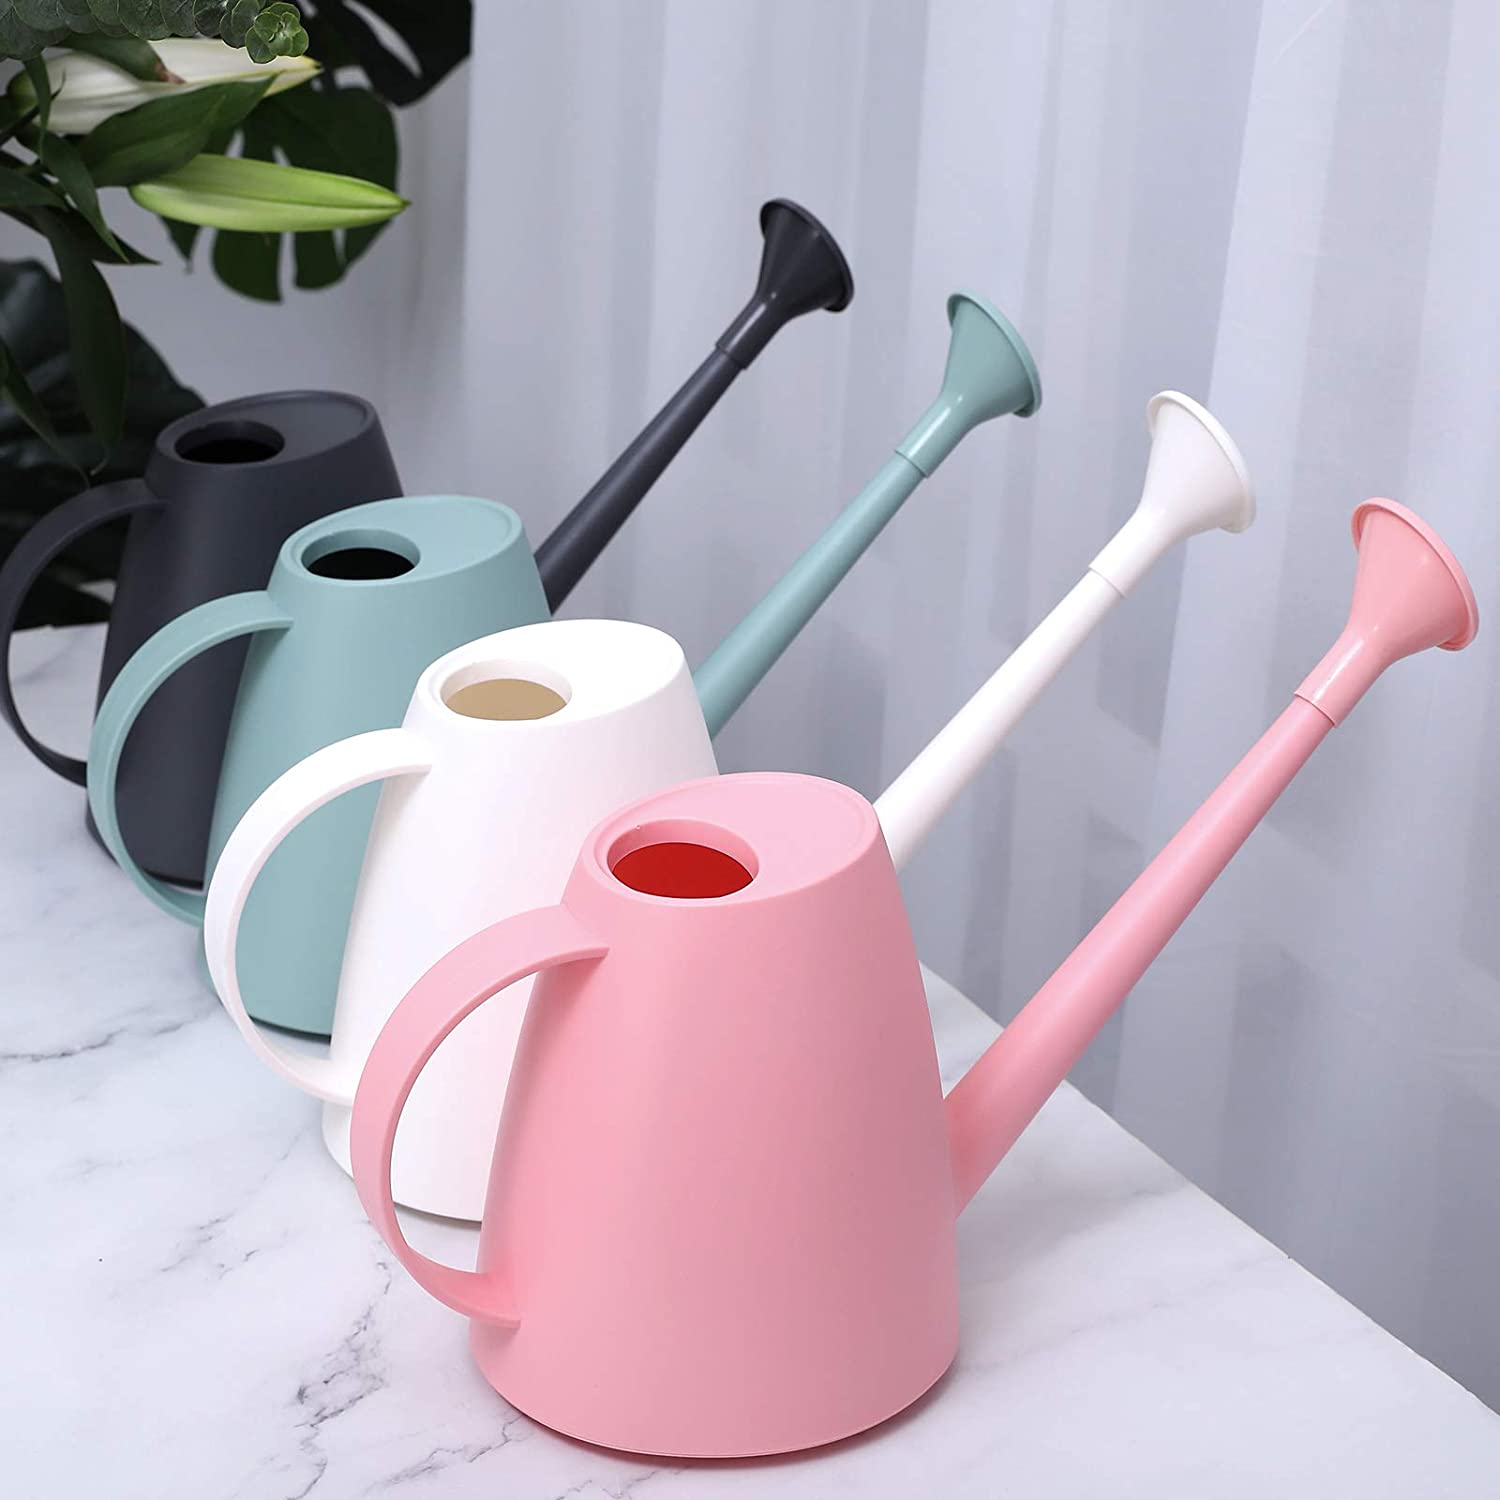 Succulents Smouldr Mini Plant Watering Can Indoor: Rose Gold Small Watering Can Helps You Water Tiny House Plants Bonsai or Herb Gardens 15 Ounces Steel Plant Waterer for Miniature Flower Pots 